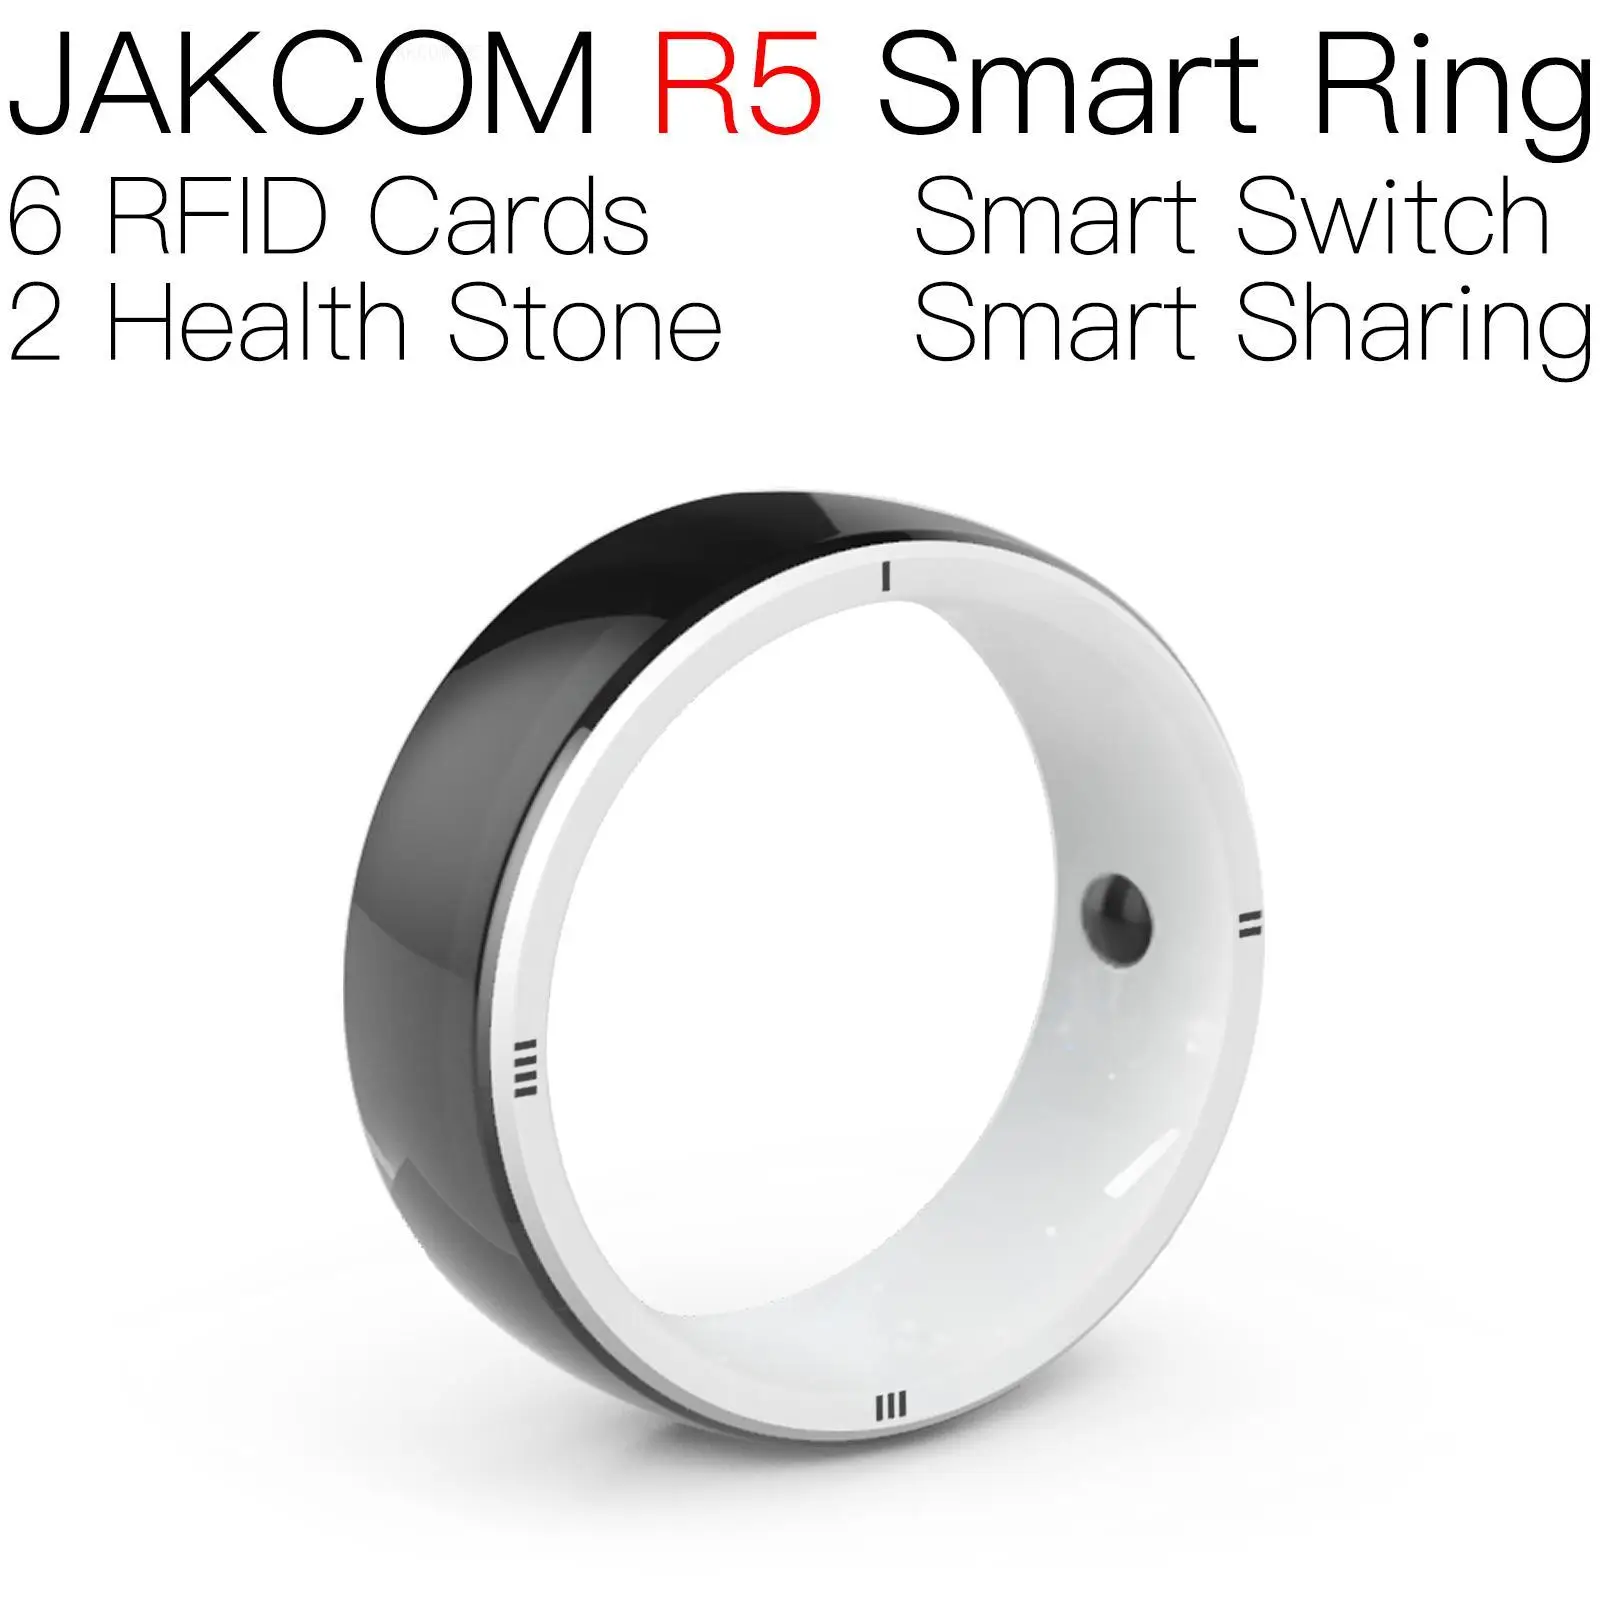 

JAKCOM R5 Smart Ring Newer than rfid mhz rewritable adesivi pet tag star pack benzing chips pigeon nfc identify magnetic